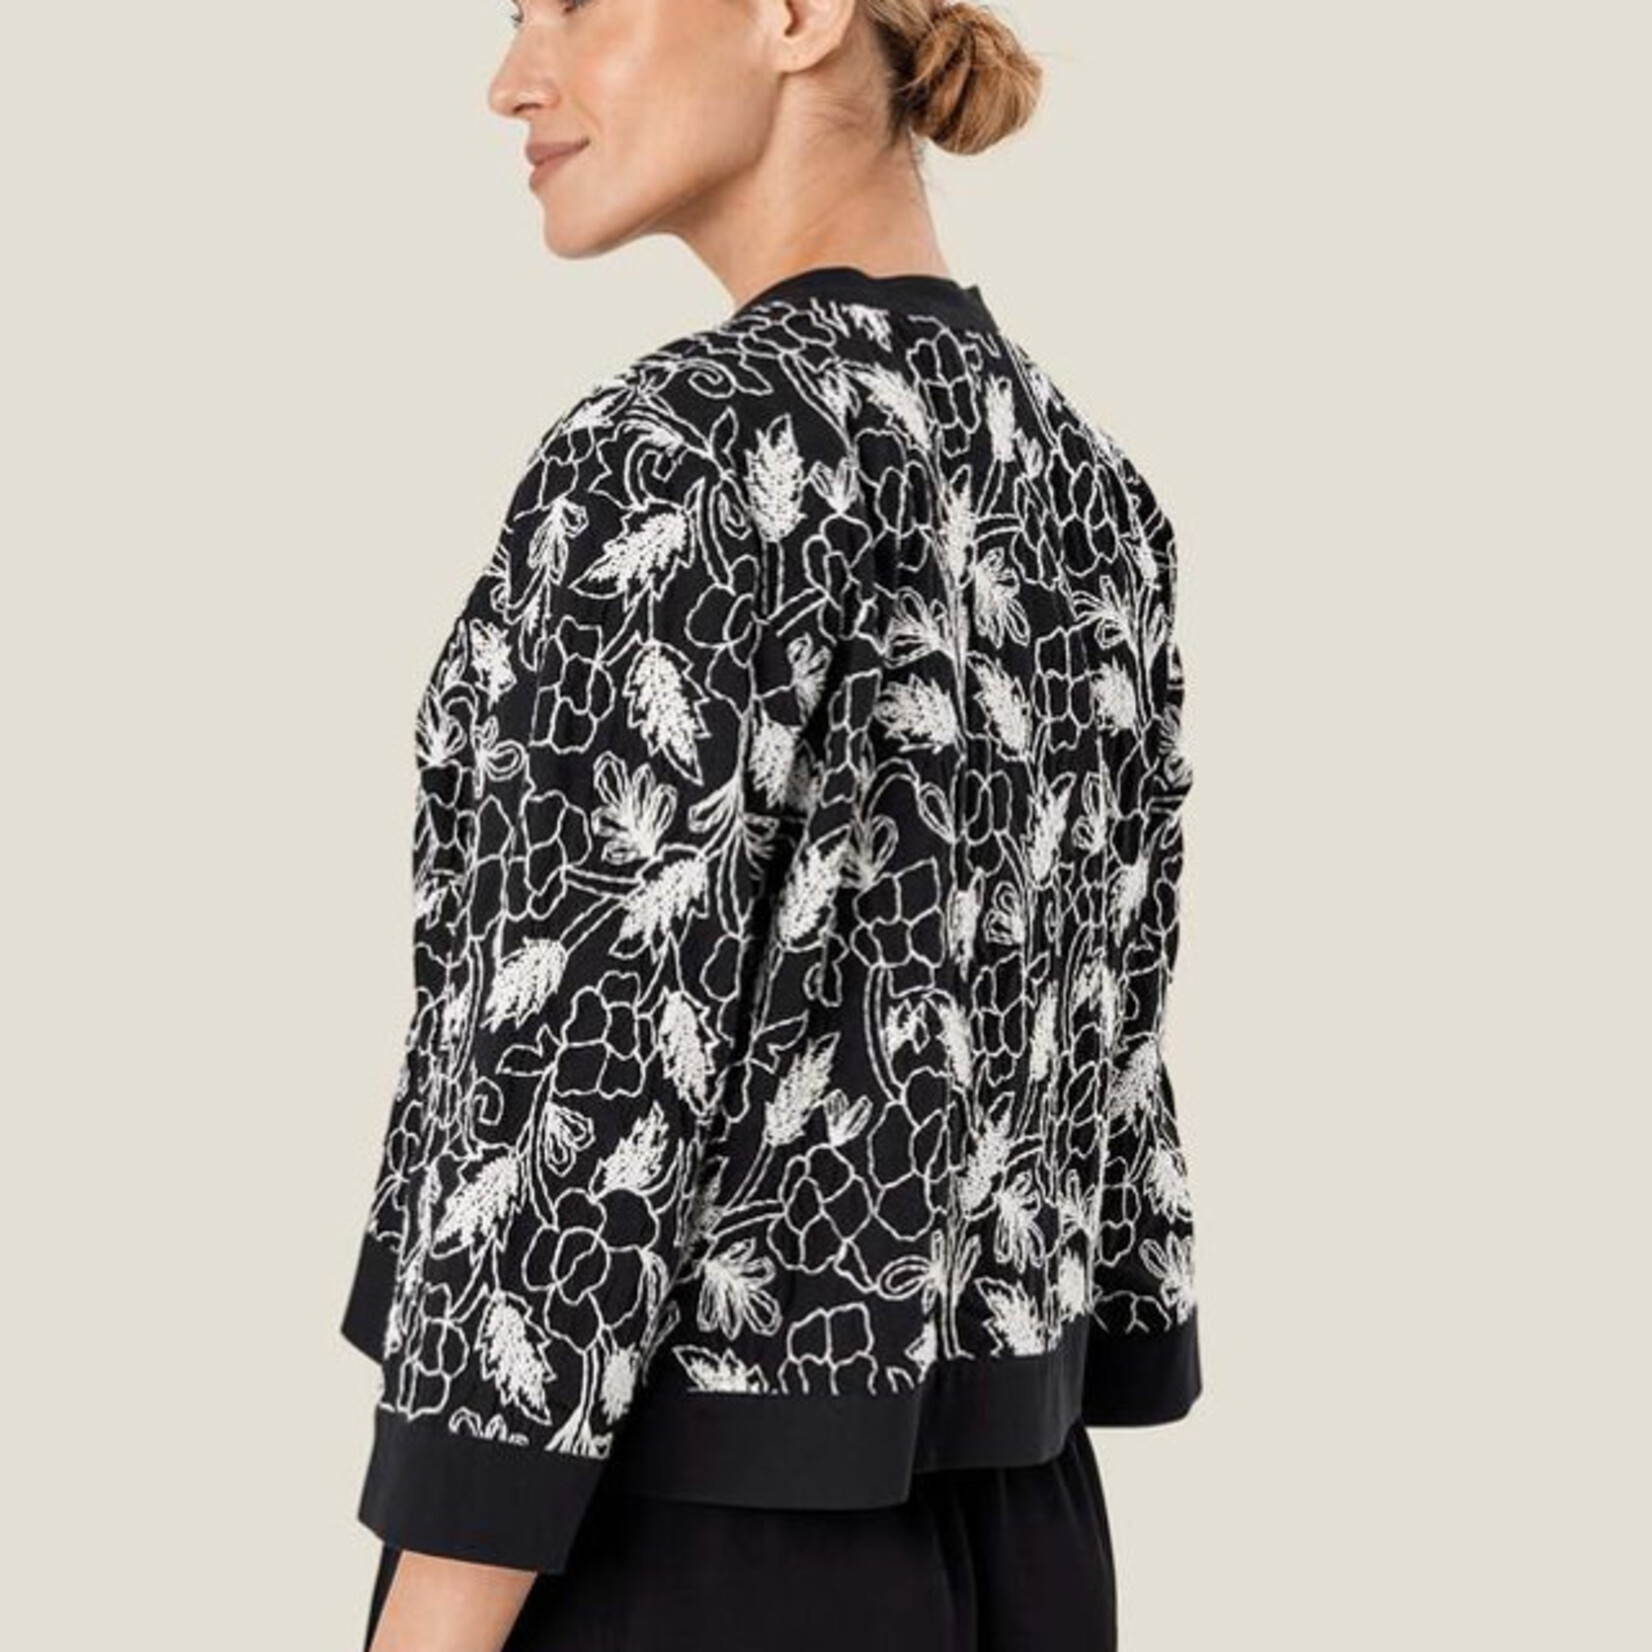 Masai Copenhagen Black With White Floral Embroidery Short Jacket